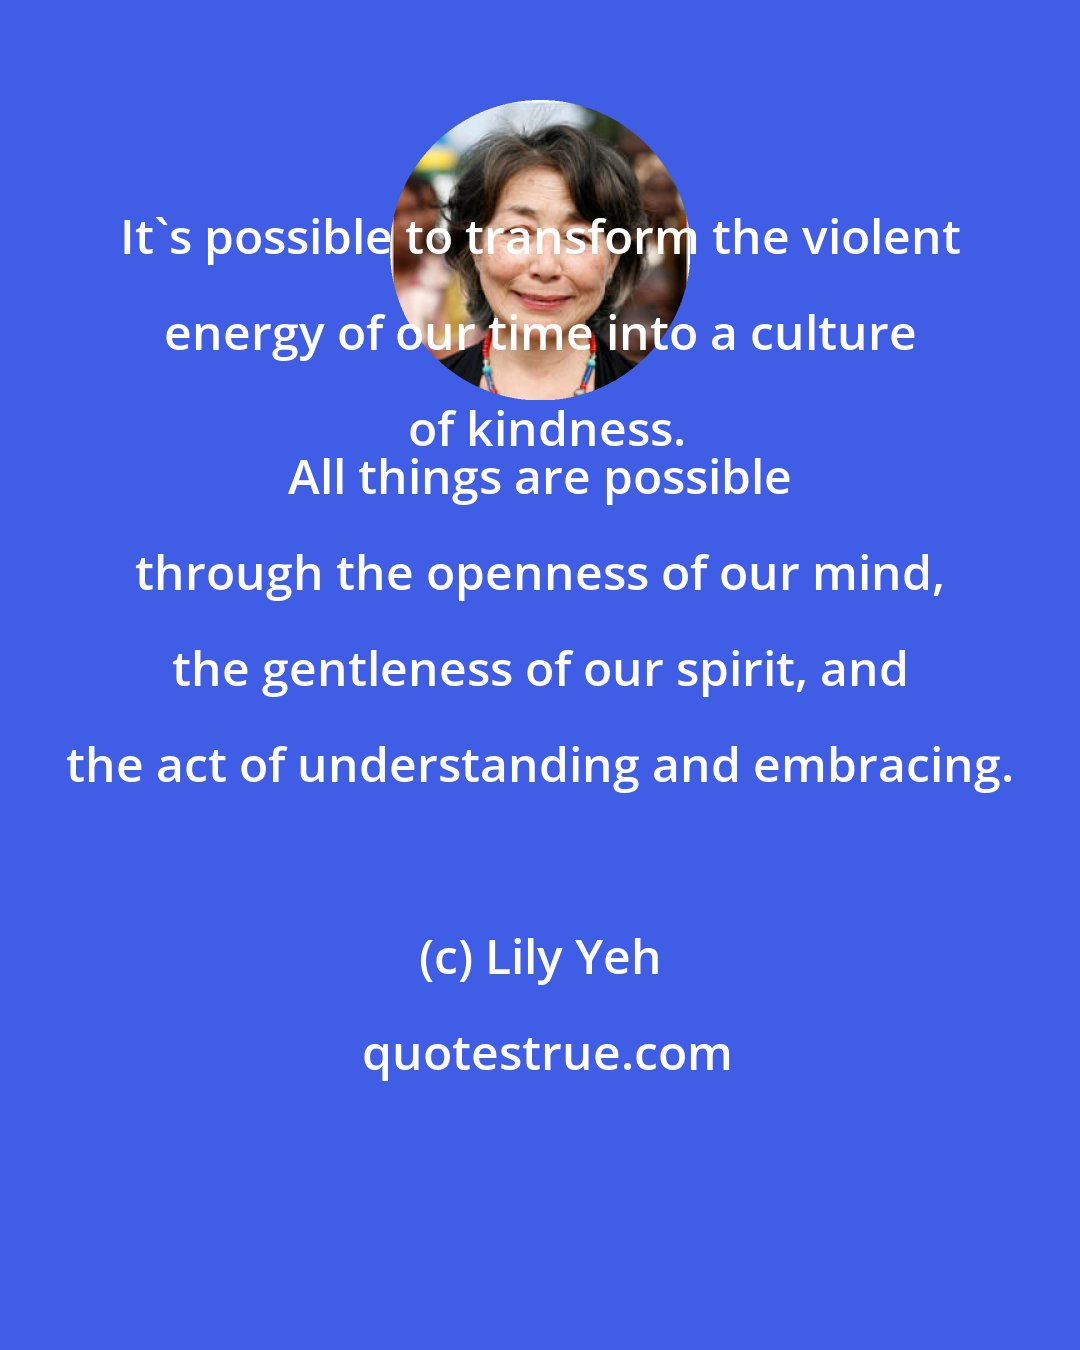 Lily Yeh: It's possible to transform the violent energy of our time into a culture of kindness.
 All things are possible through the openness of our mind, the gentleness of our spirit, and the act of understanding and embracing.